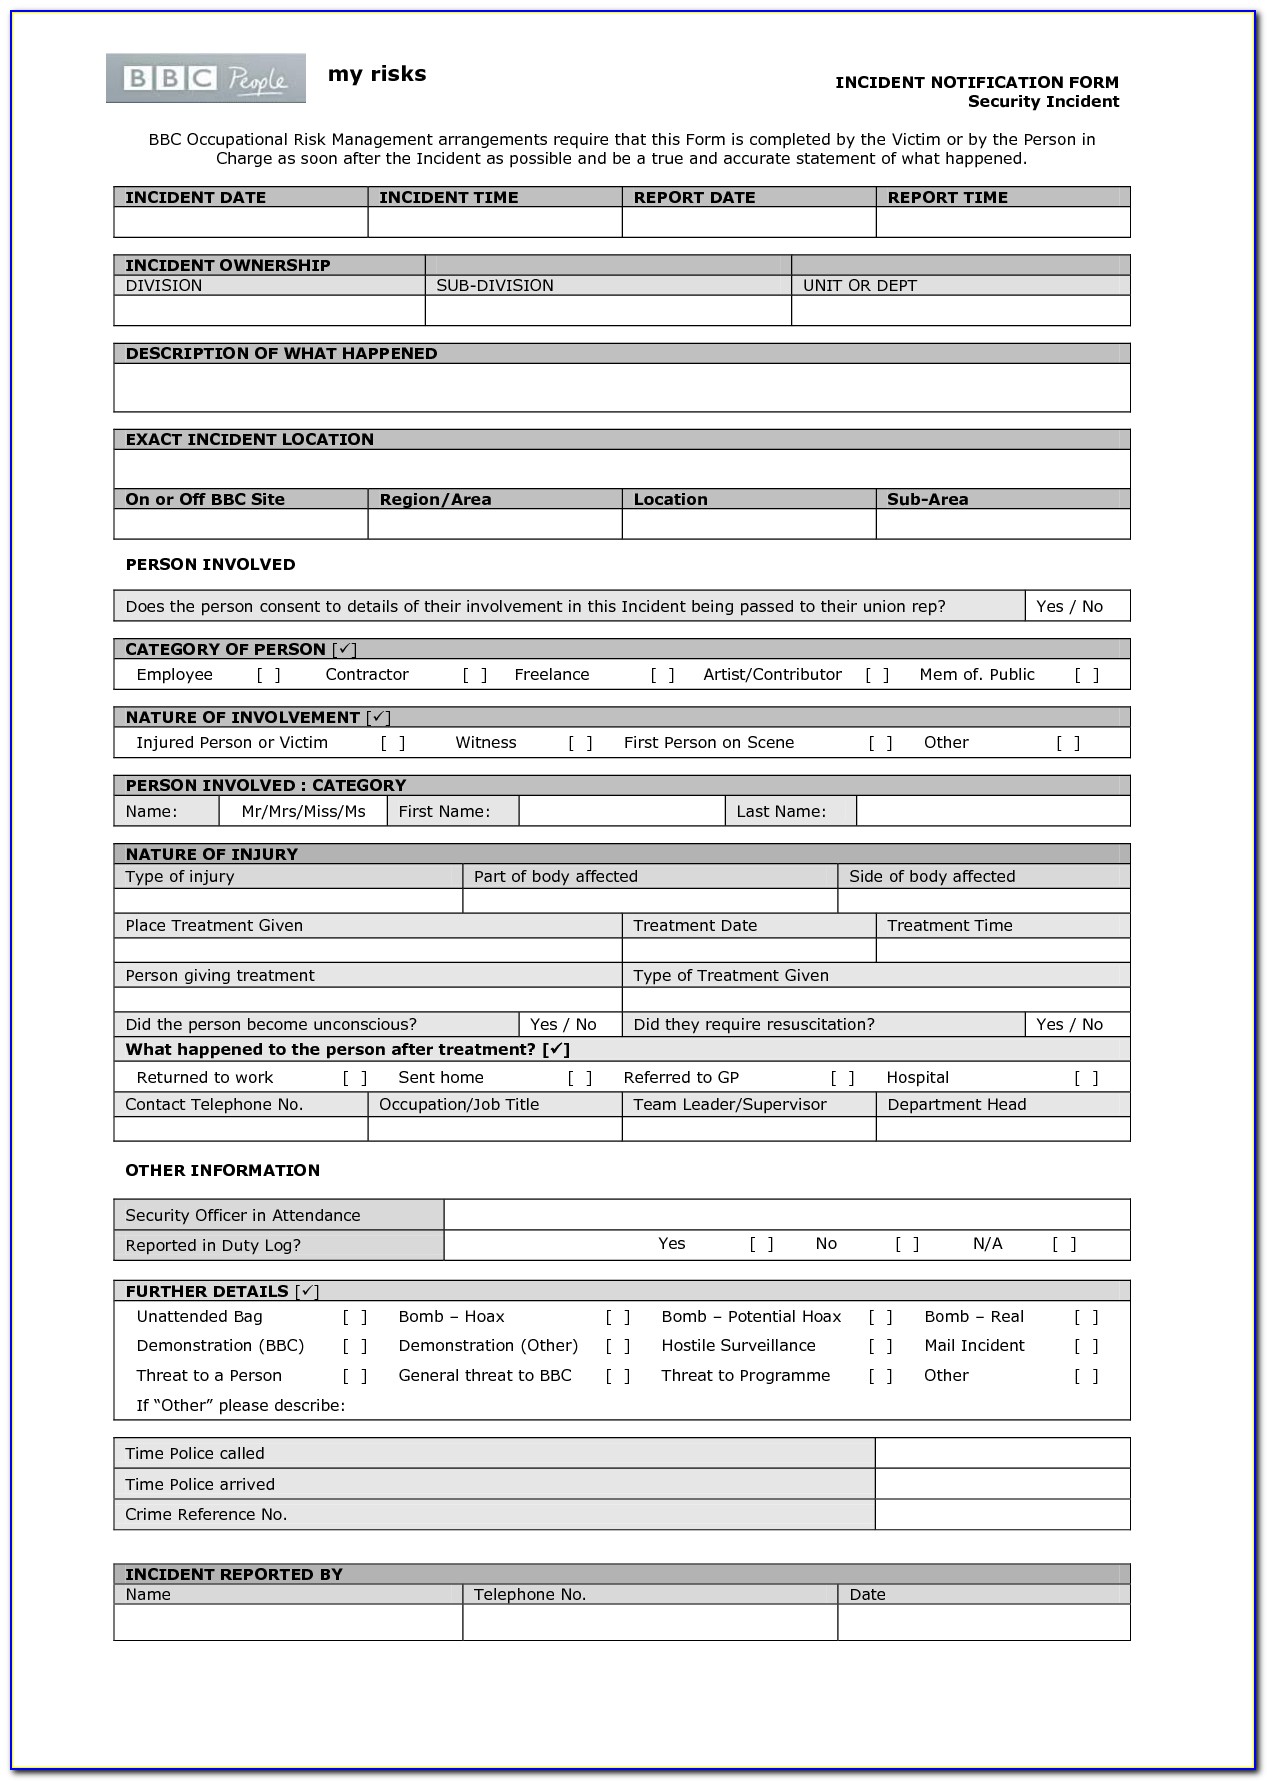 Security Guard Incident Report Form Template